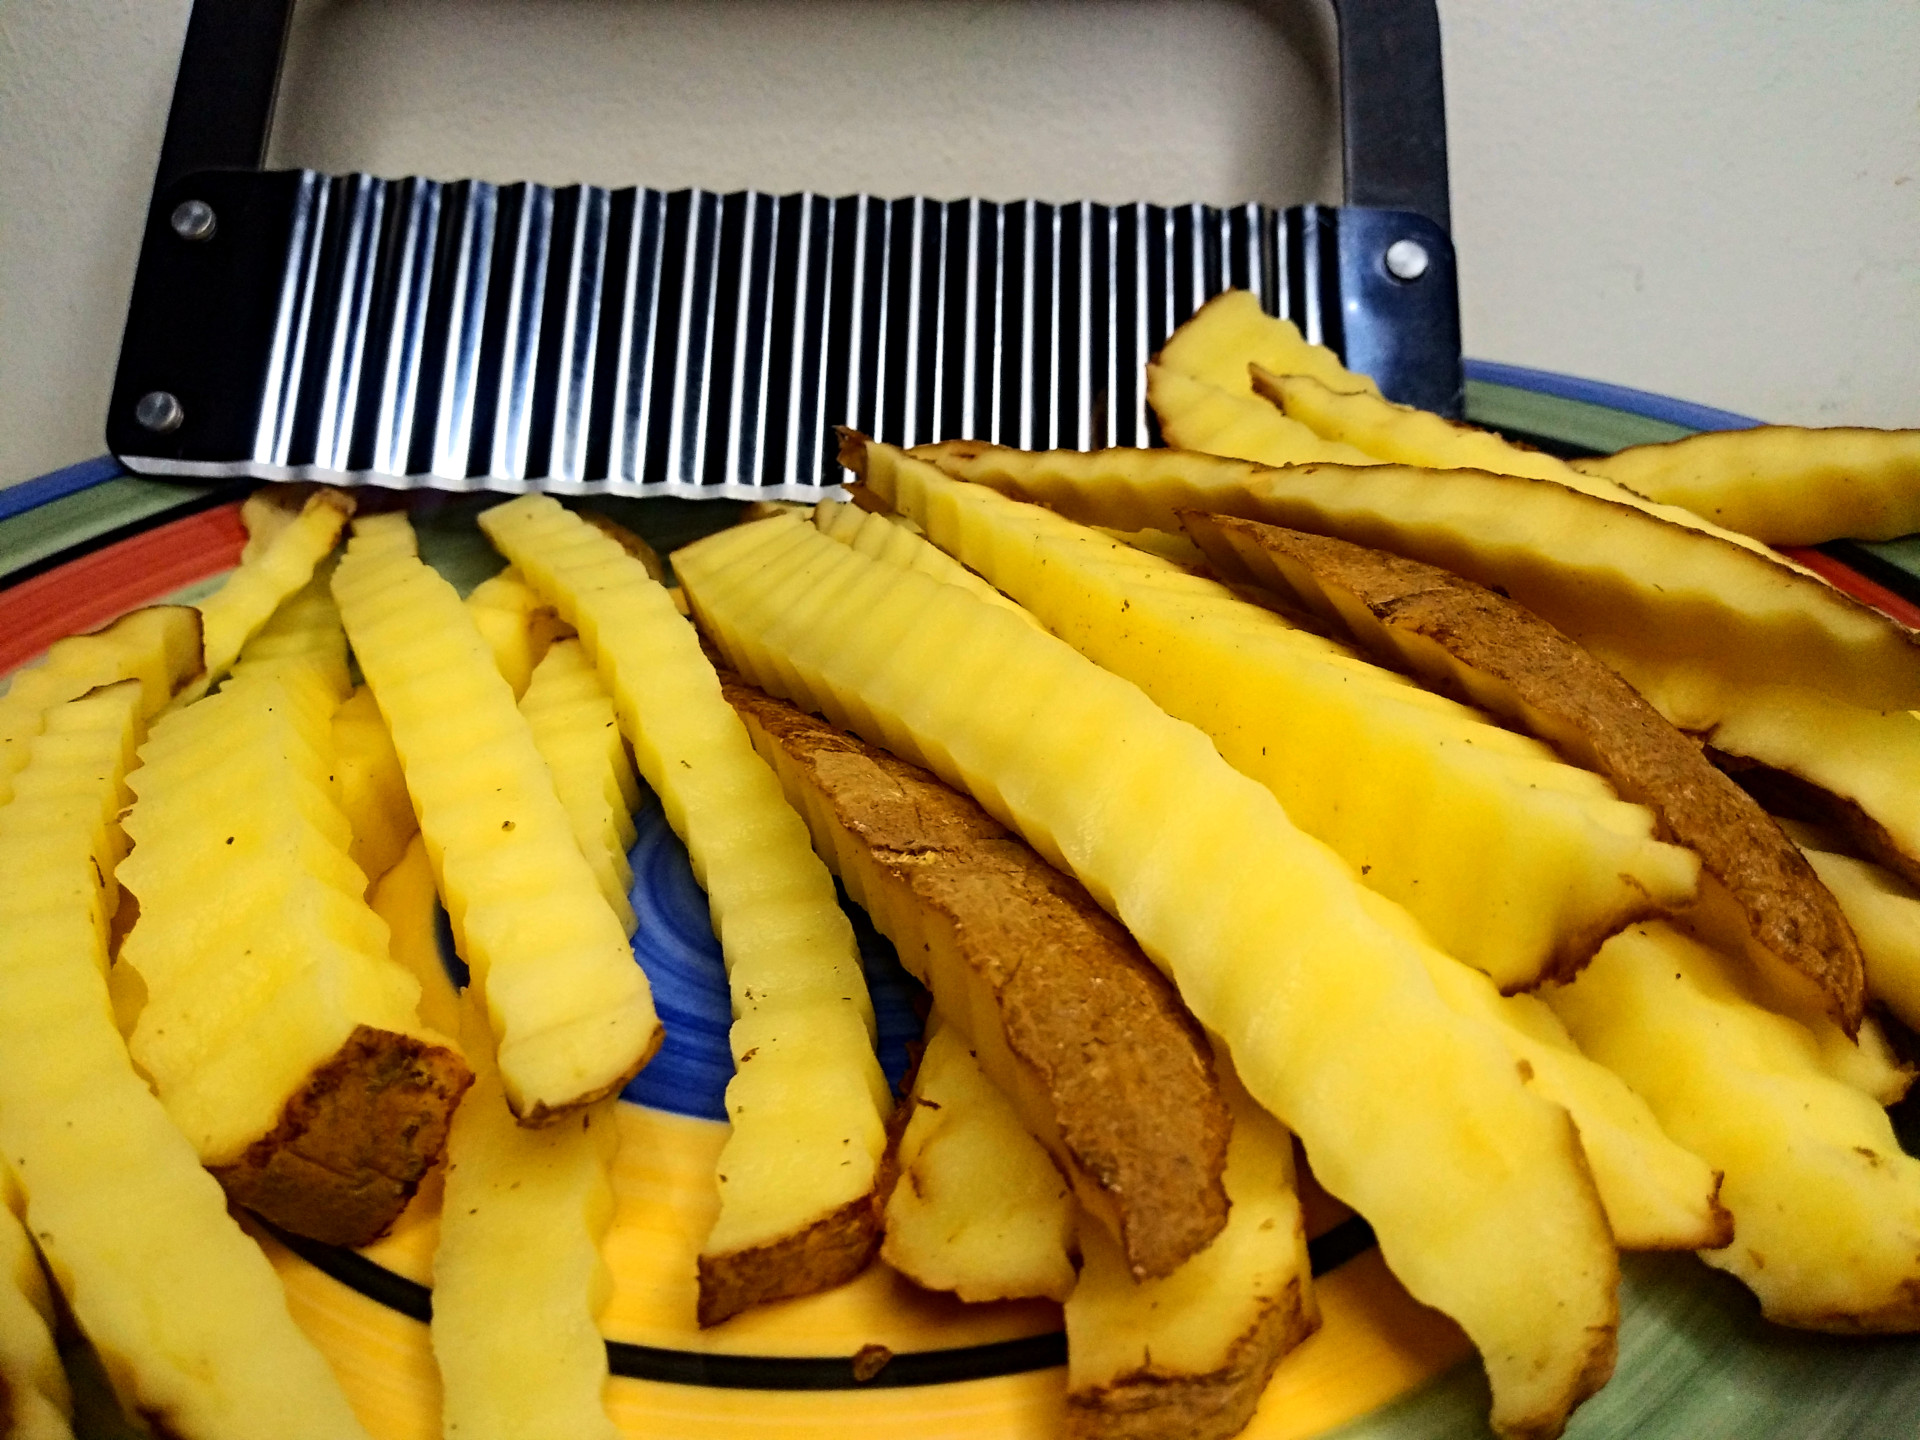 Plate of freshly crinkle cut fries on colorful plate with crinkle cutter visible at back of plate